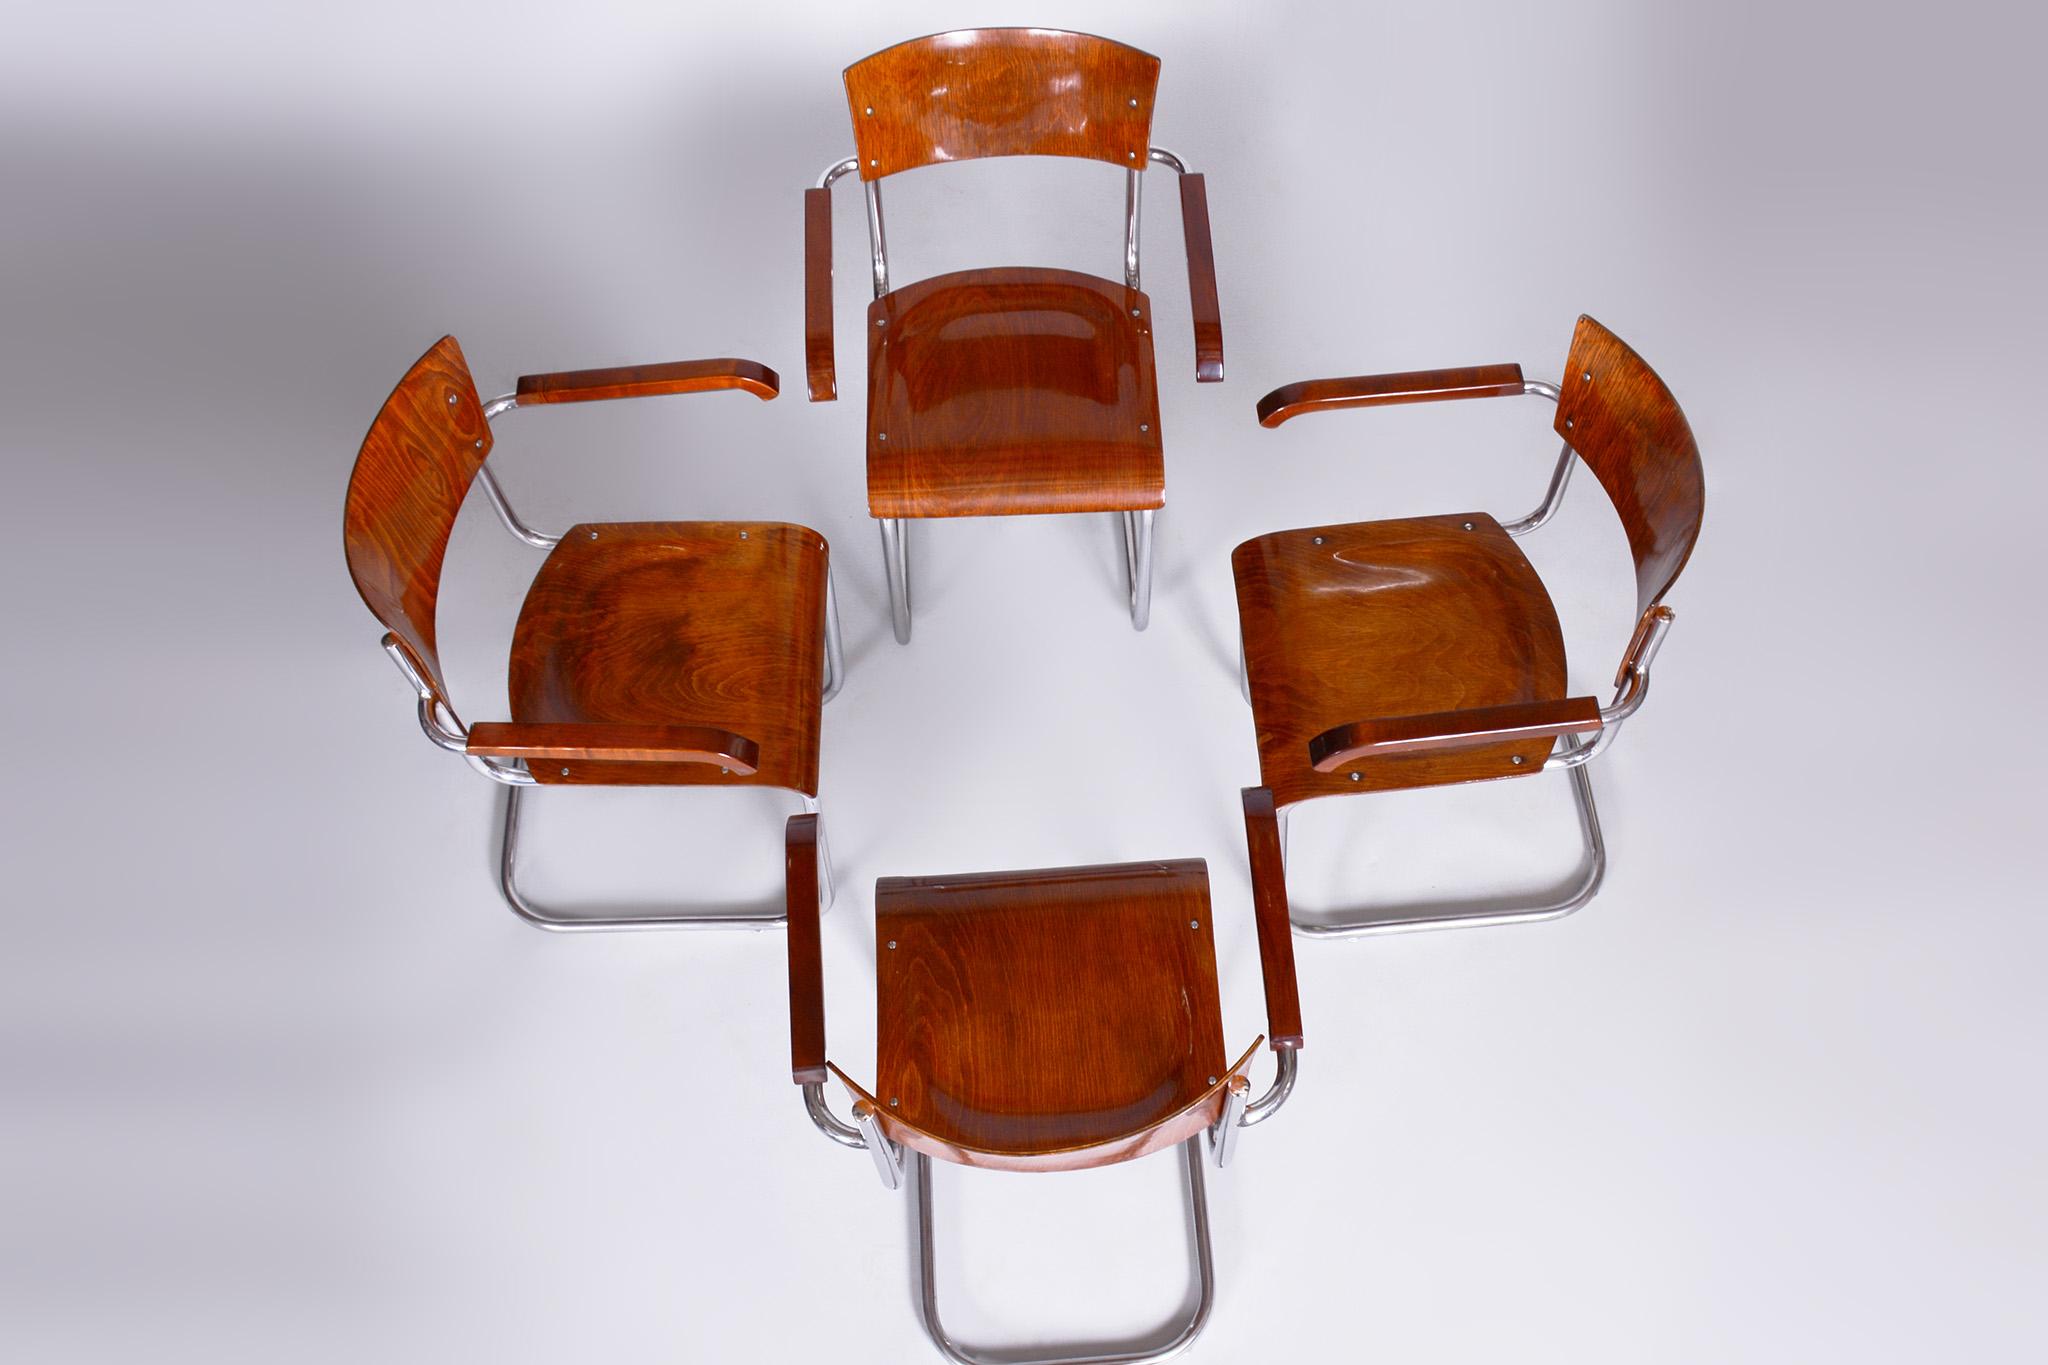 Set of 4 Restored Bauhaus Beech Armchairs Designed by Mart Stam, 1930s, Czechia For Sale 2